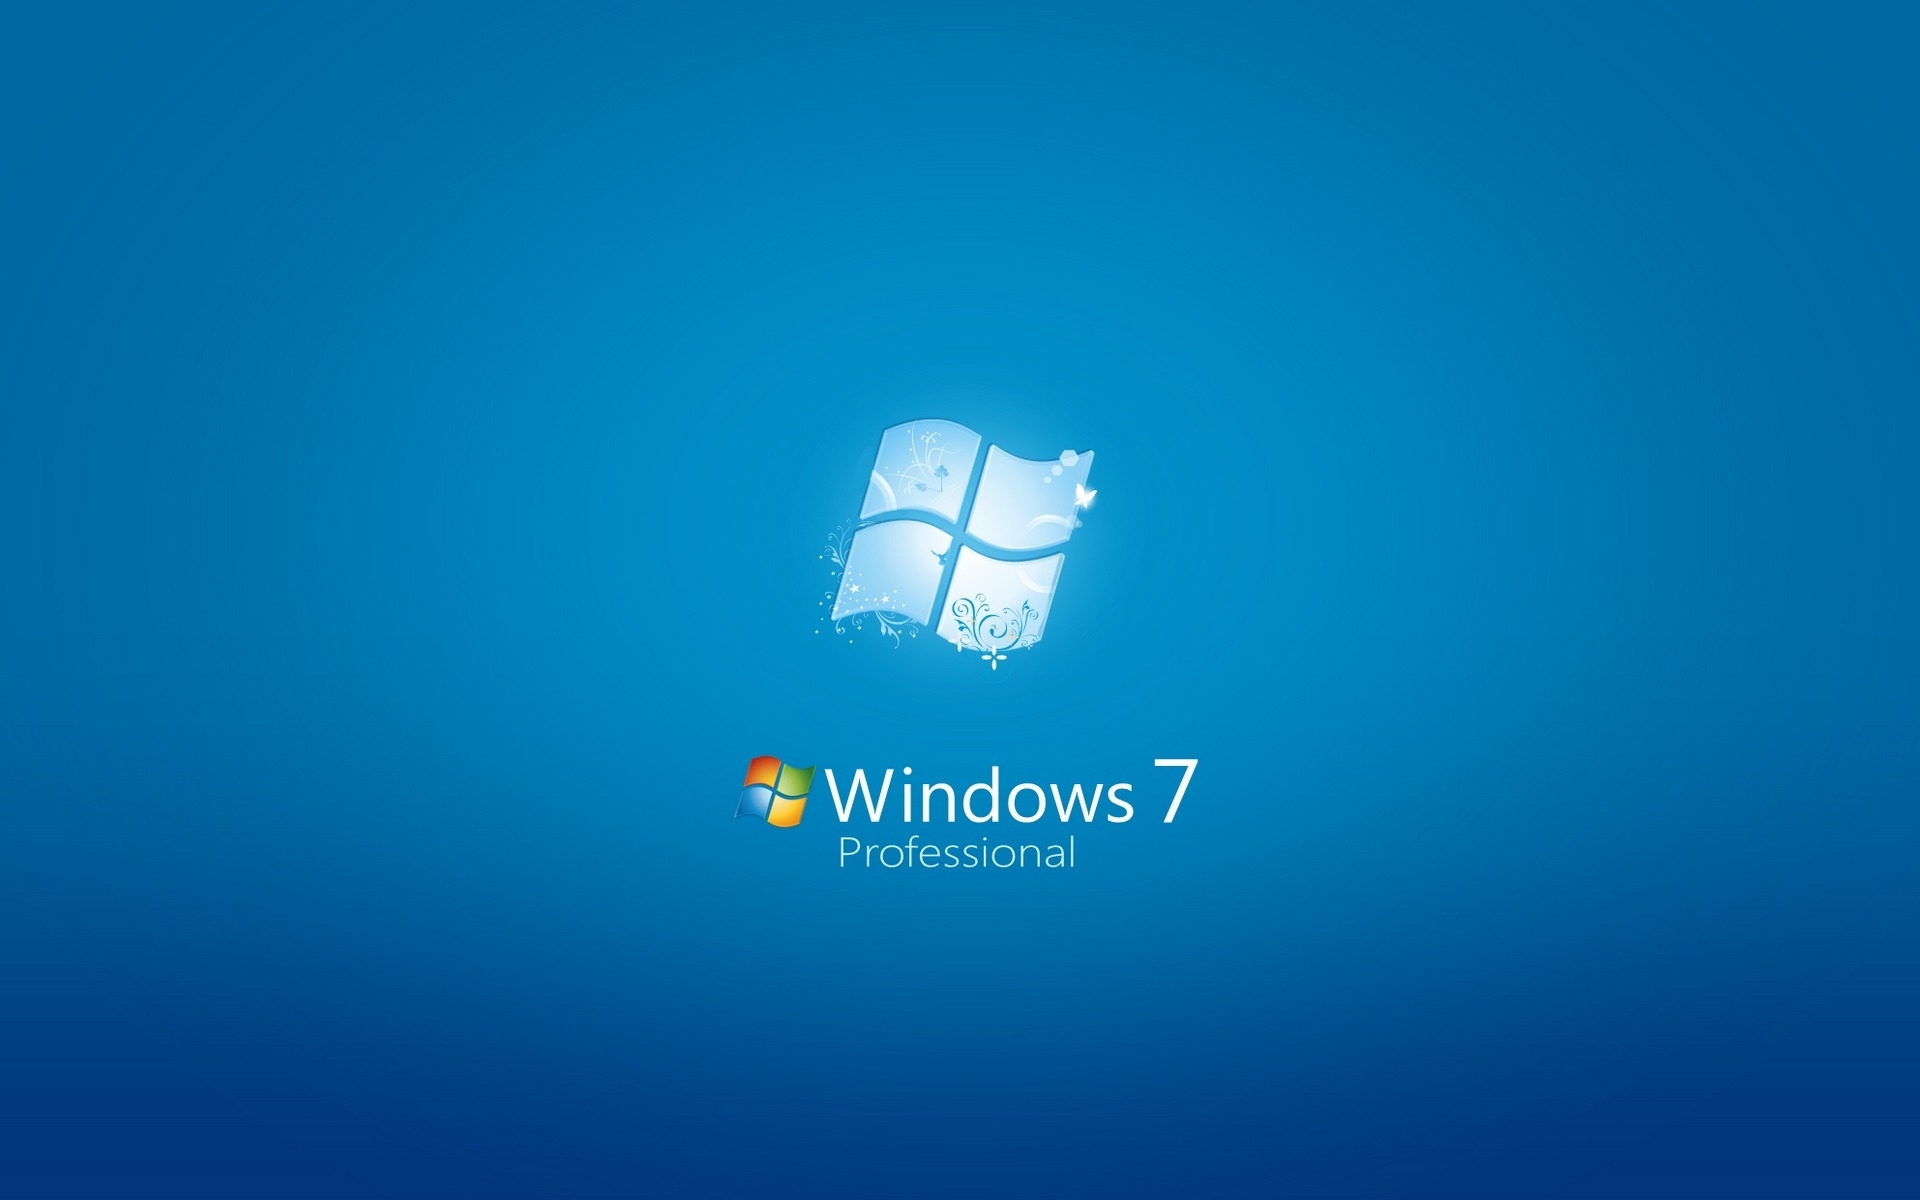 windows 7 professional wallpapers | hd wallpapers | id #8923